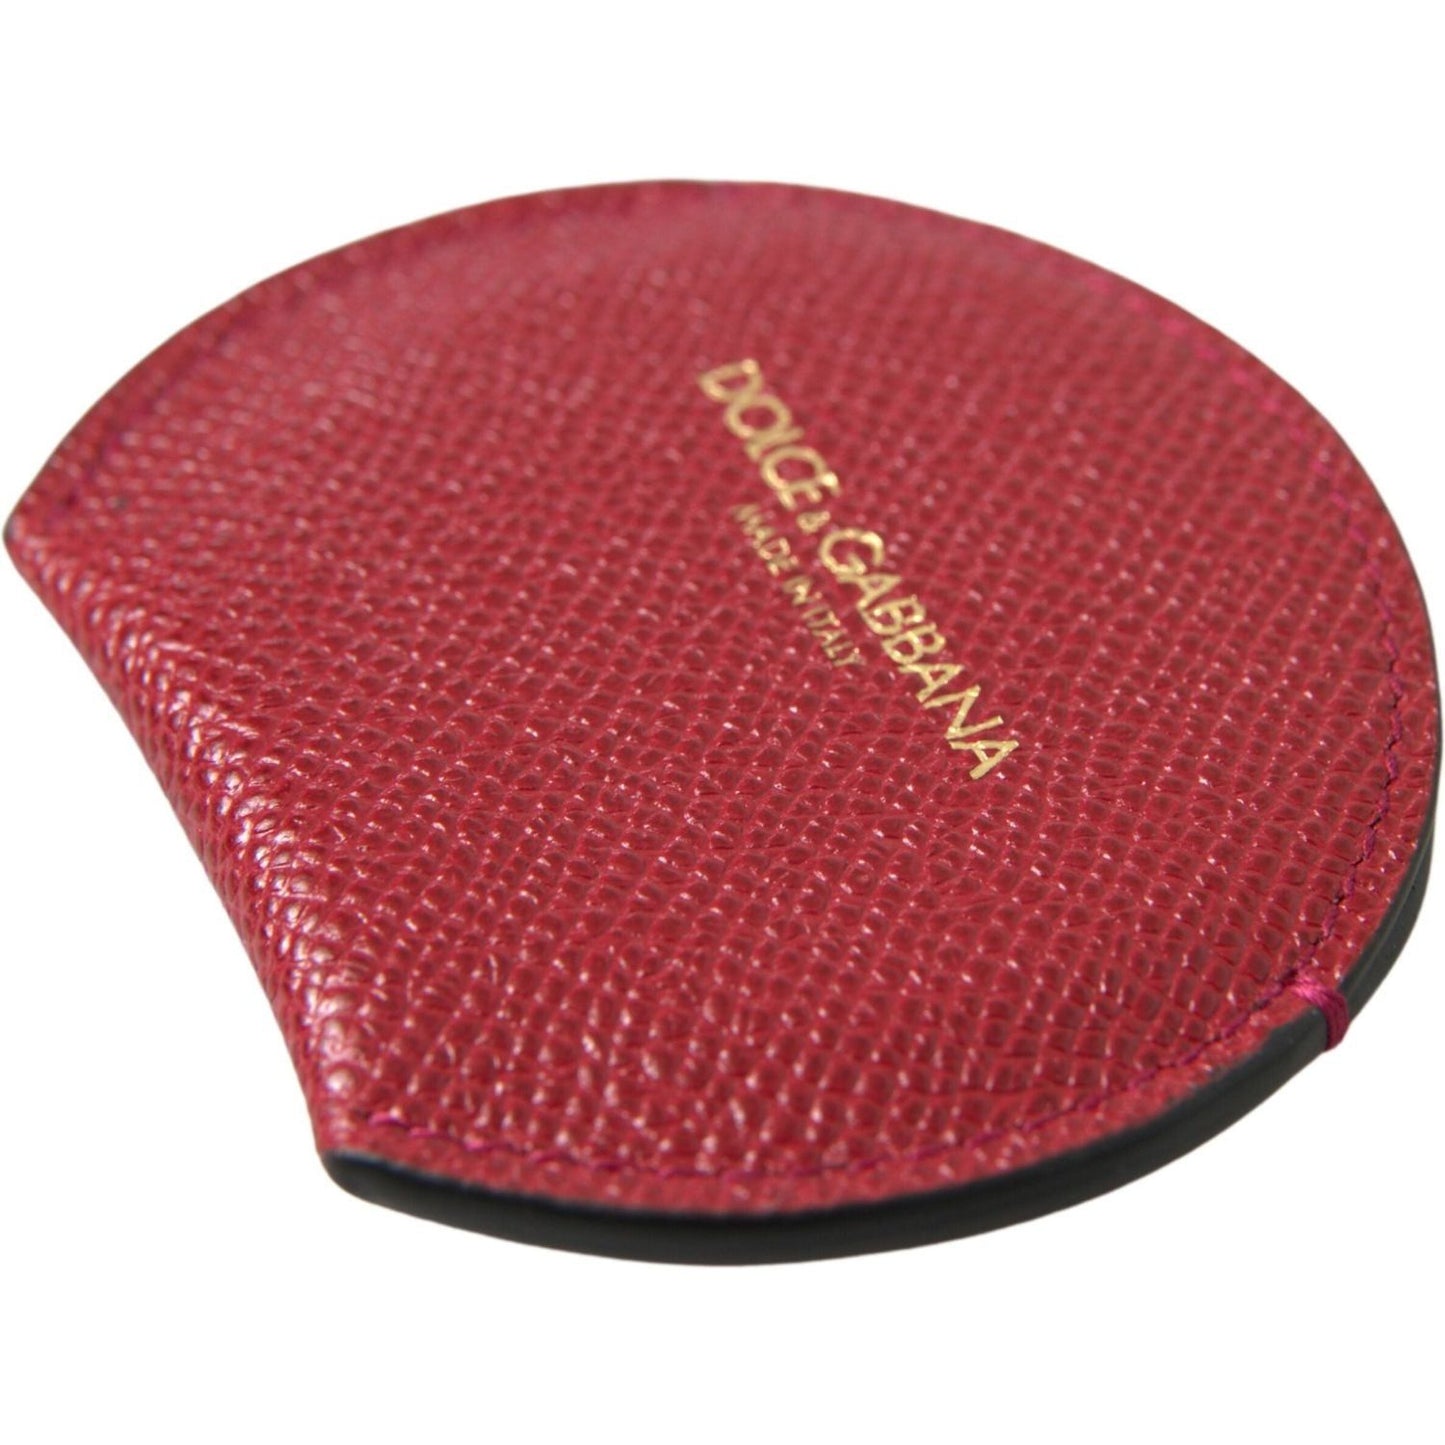 Dolce & Gabbana Chic Red Leather Hand Mirror Holder red-calfskin-leather-round-hand-mirror-holder